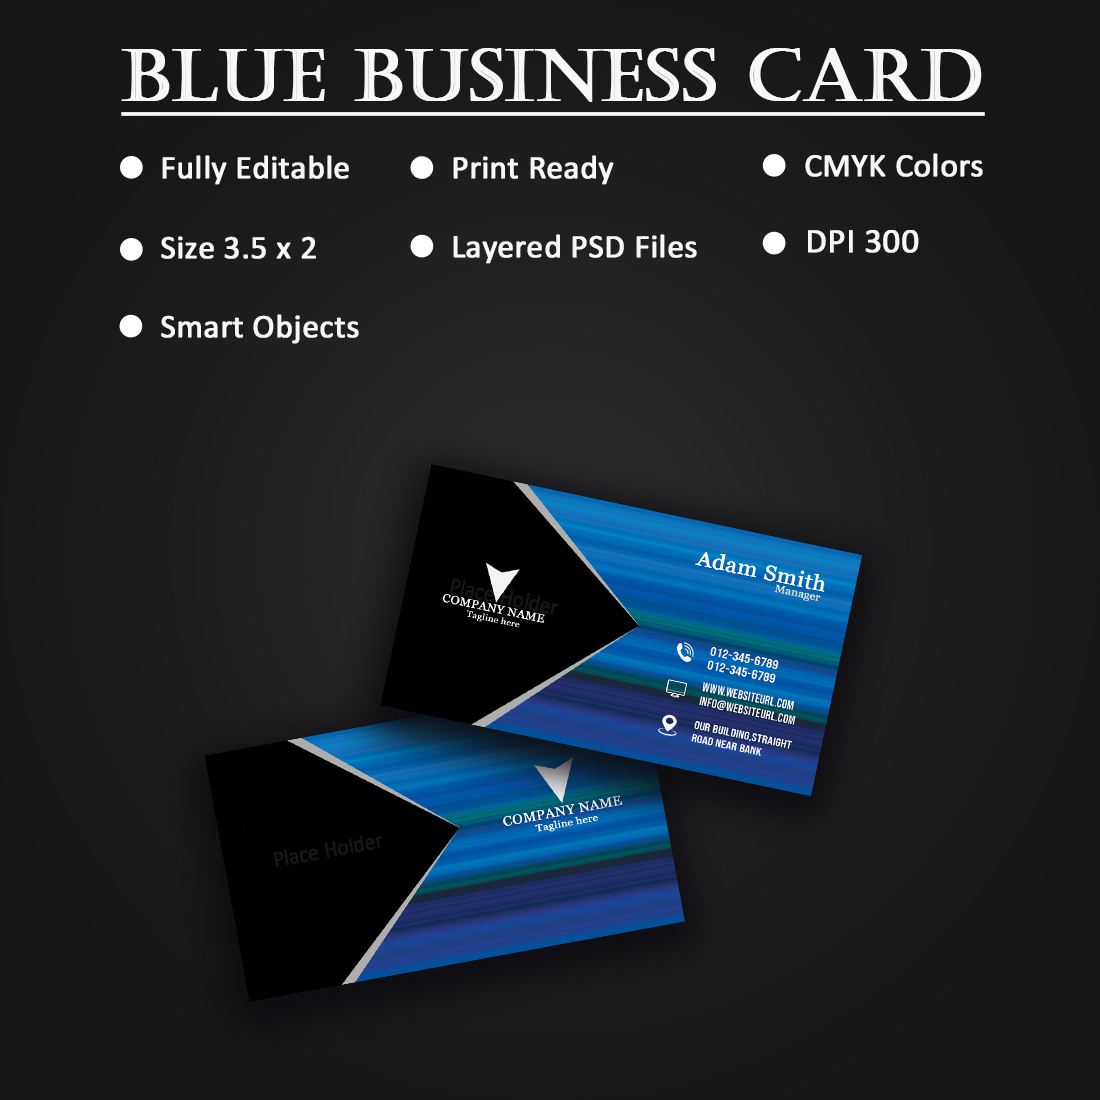 Blue and Black Business Card preview image.